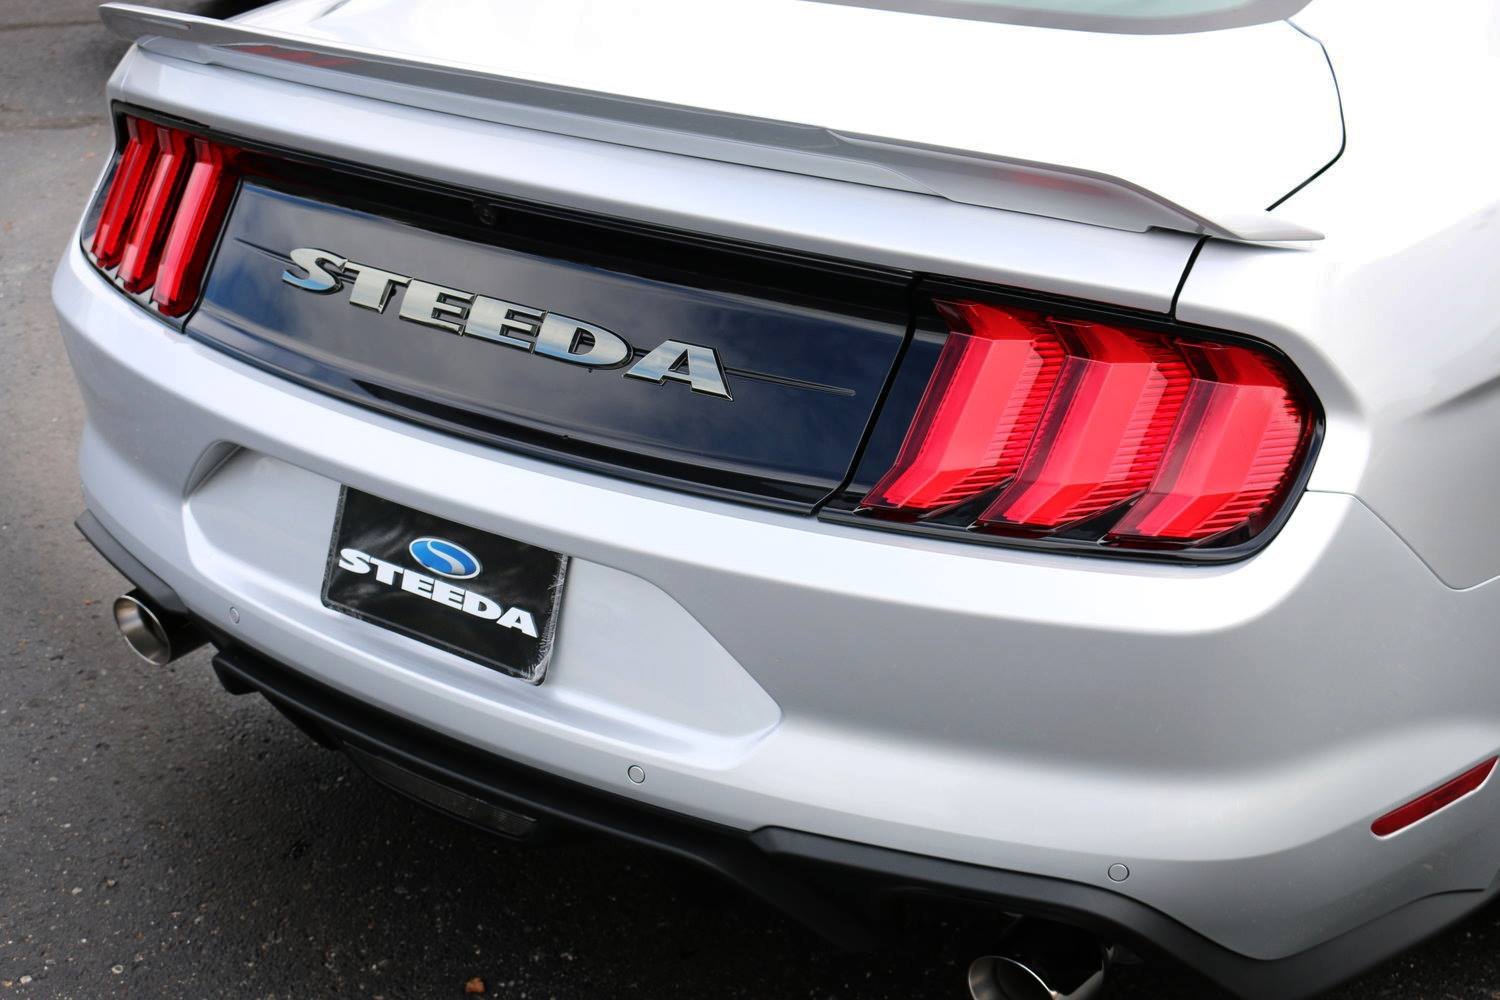 White Ford Mustang 5.0 with Aftermarket Rear Diffuser - Photo by Steeda Performance